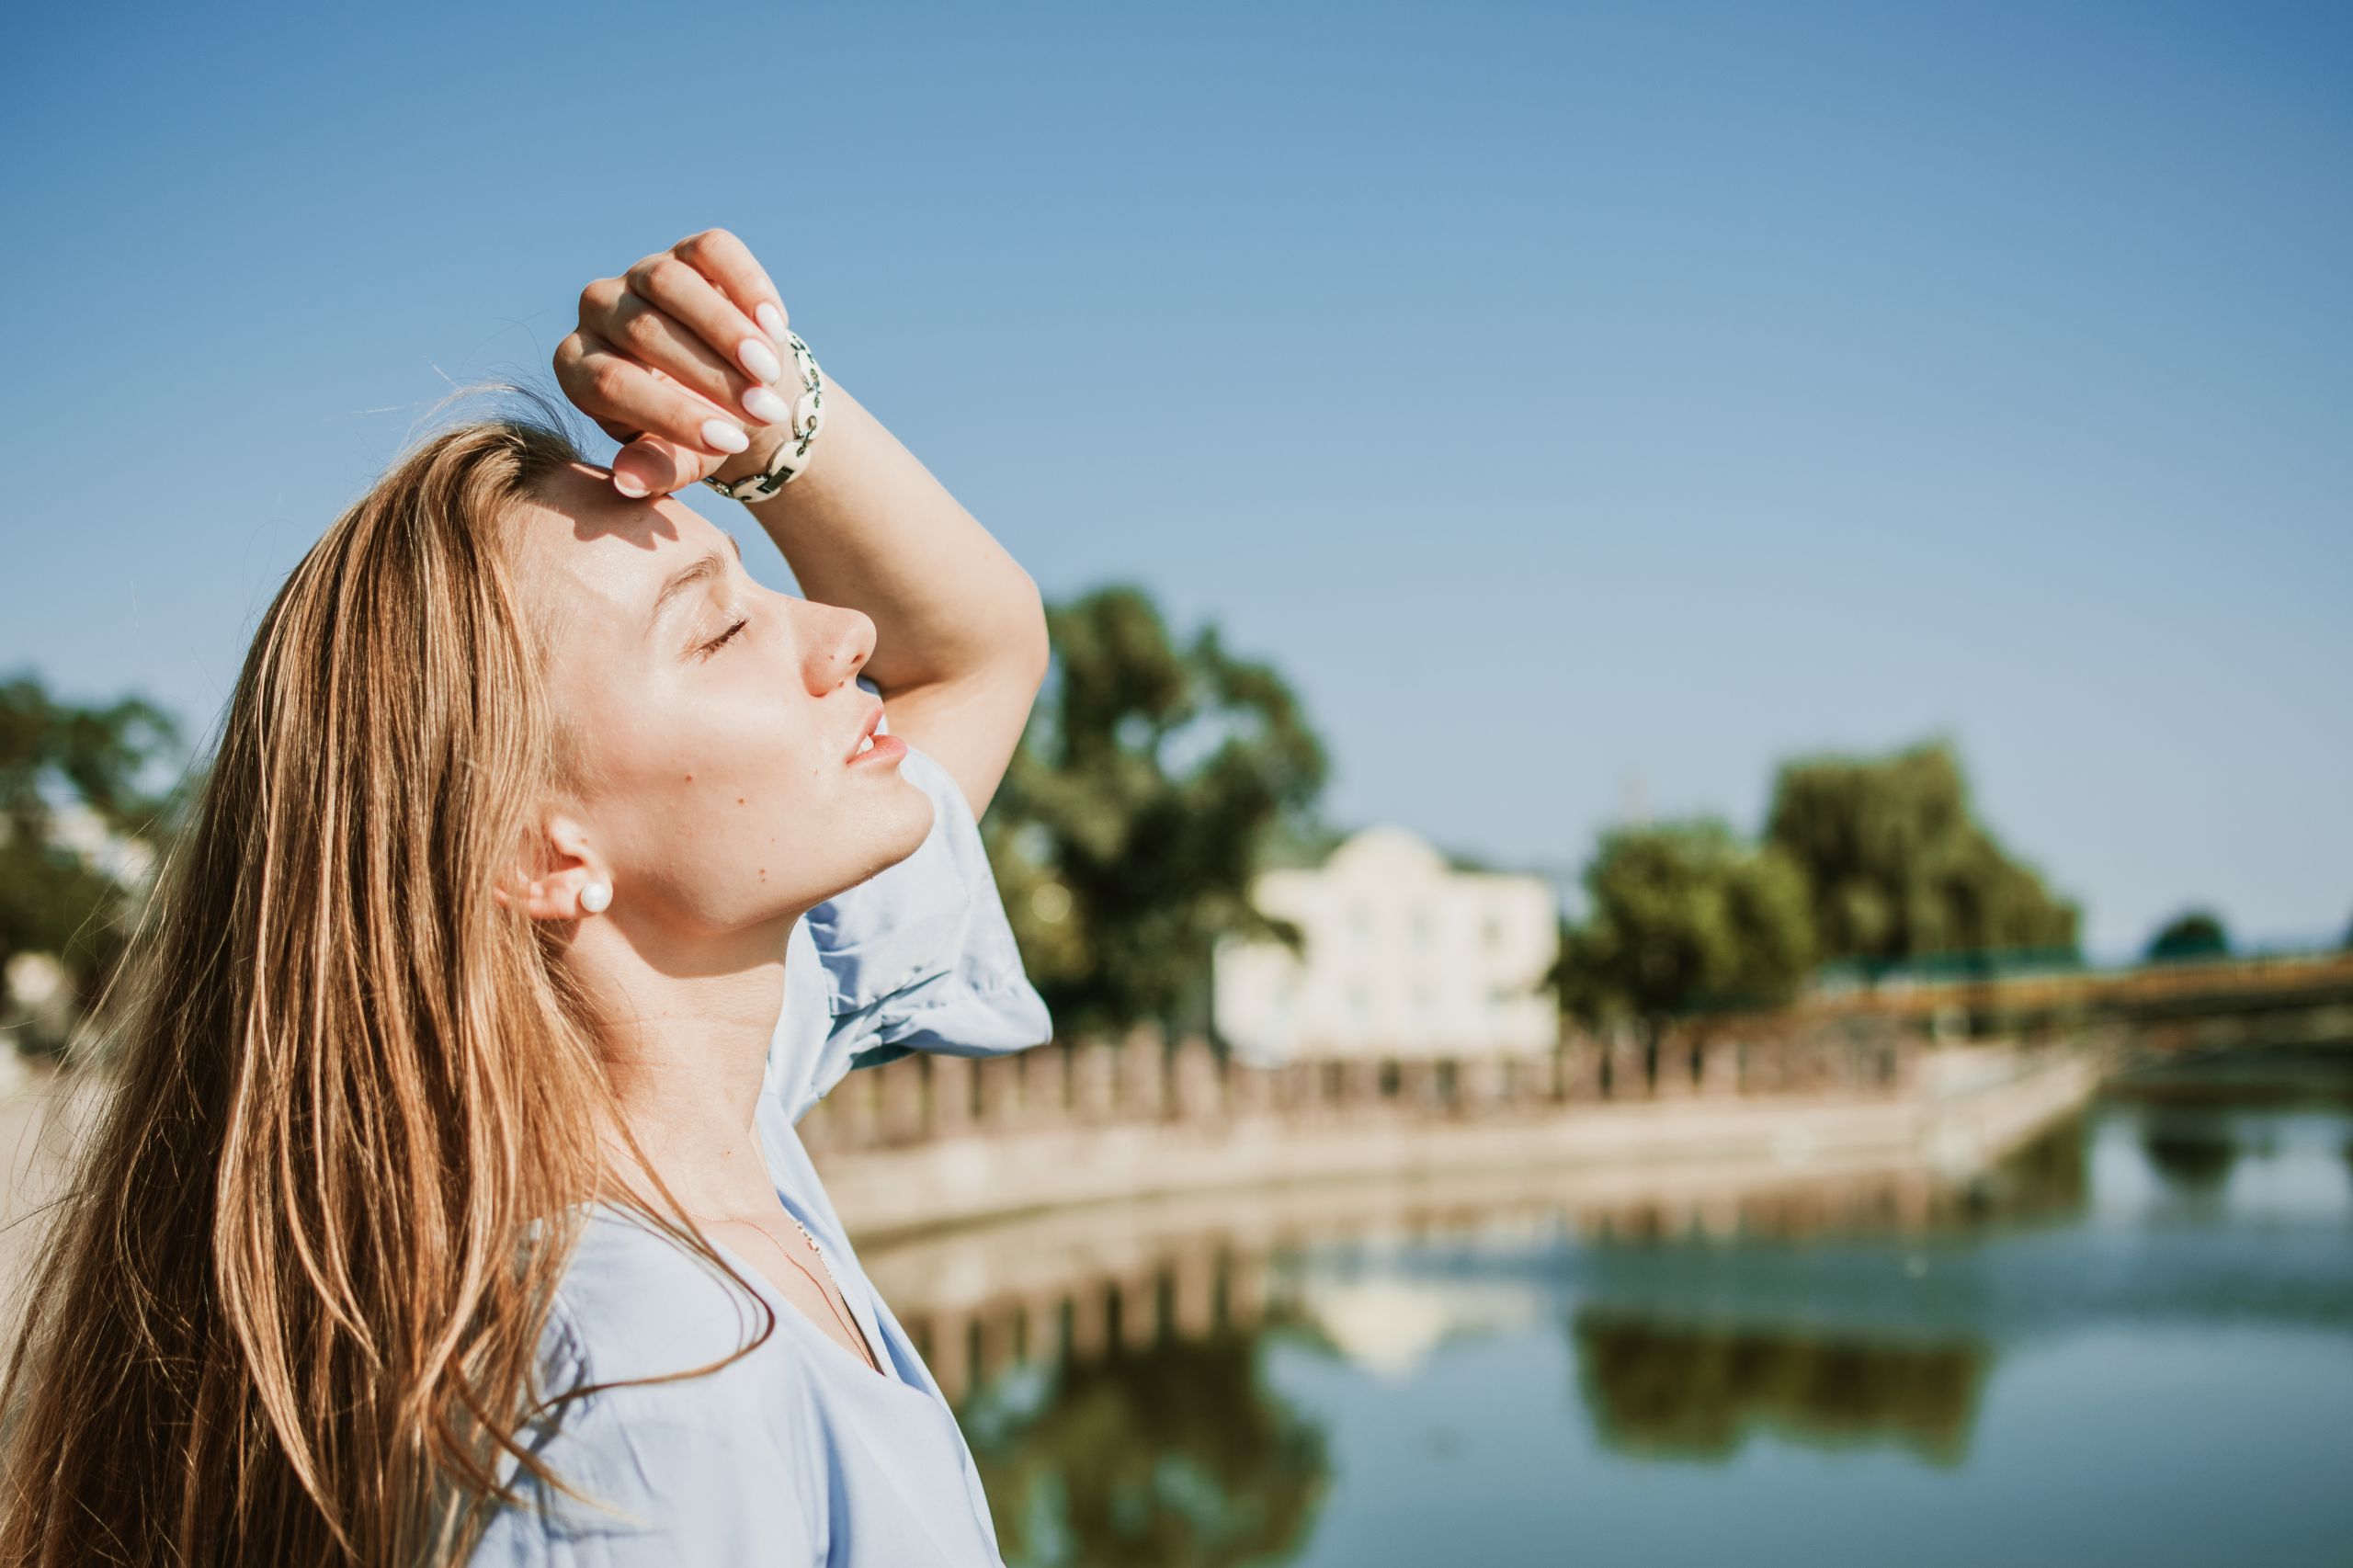 woman feeling lethargic after drinking Alcohol in the summer heat